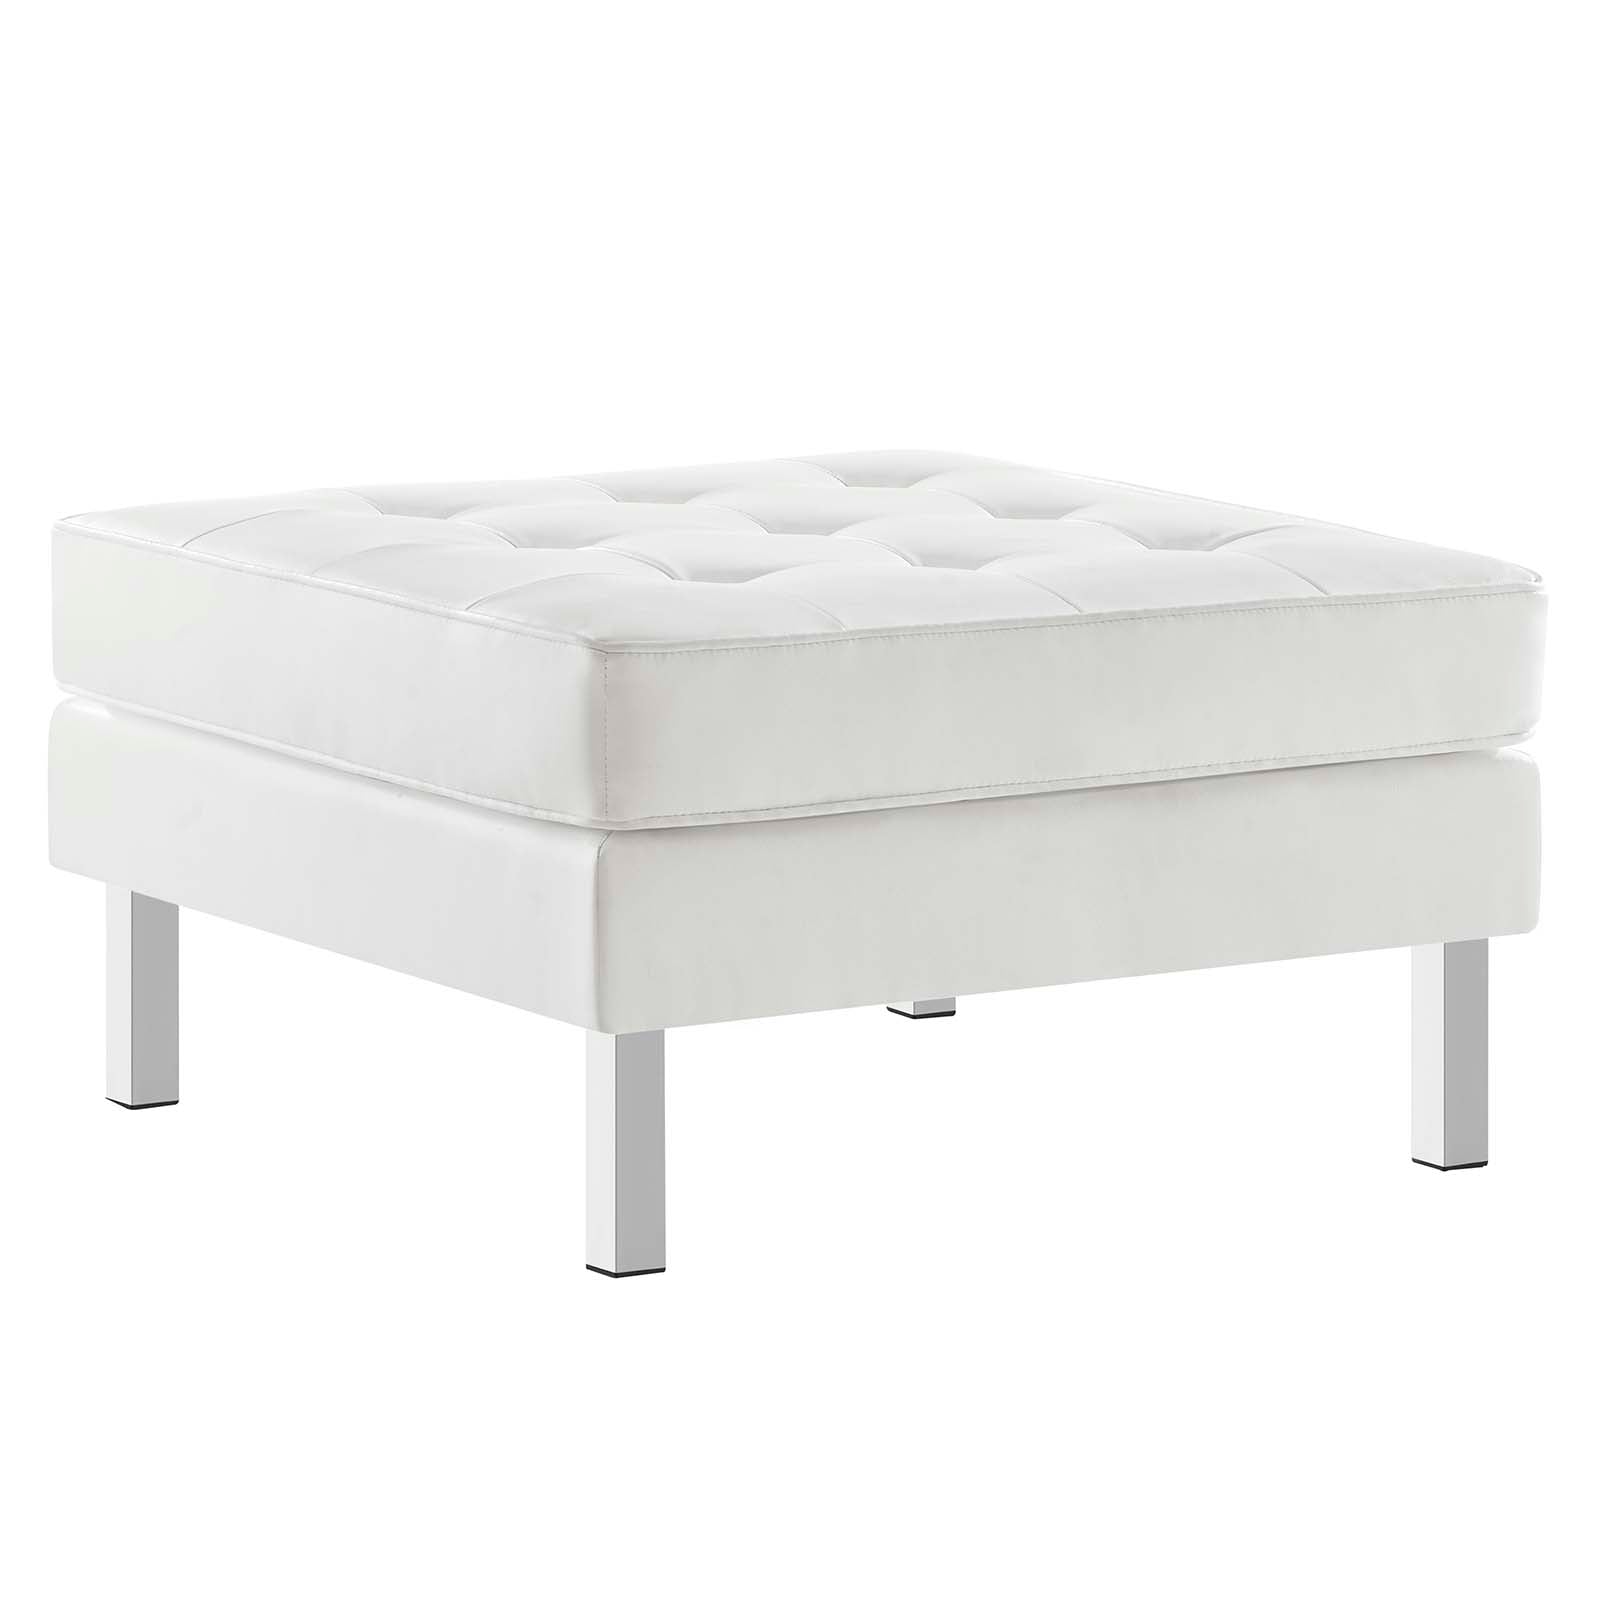 Modway Ottomans & Stools - Loft Tufted Upholstered Faux Leather Ottoman Silver White